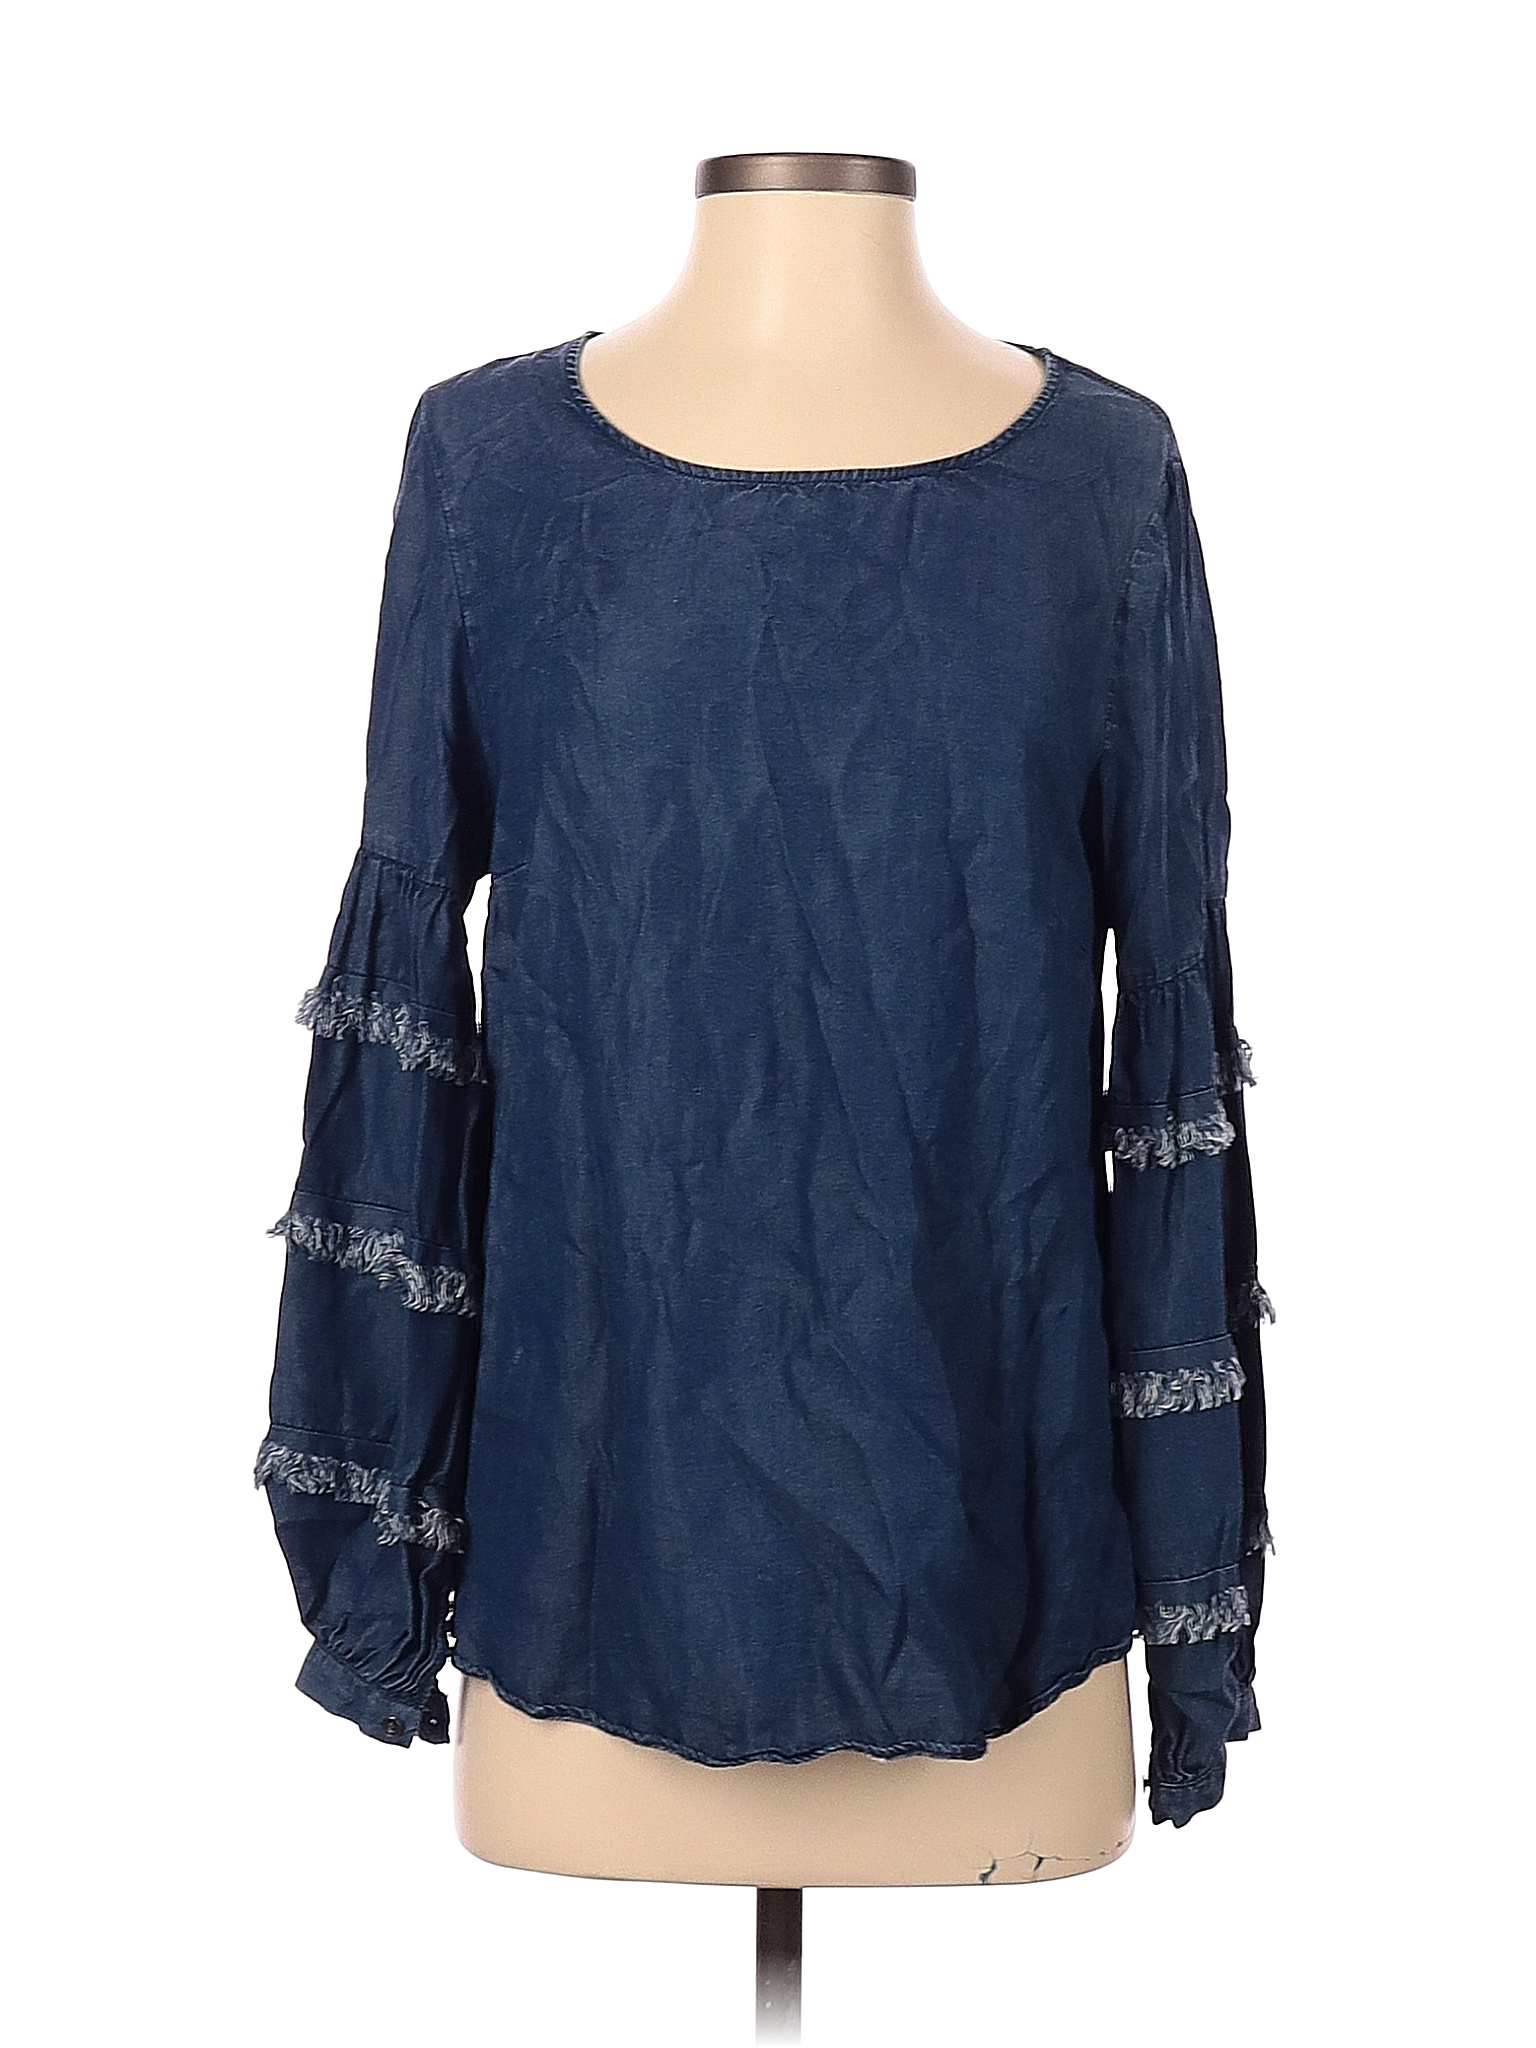 Jane and Delancey 100% Lyocell Blue Long Sleeve Blouse Size S - 88% off ...